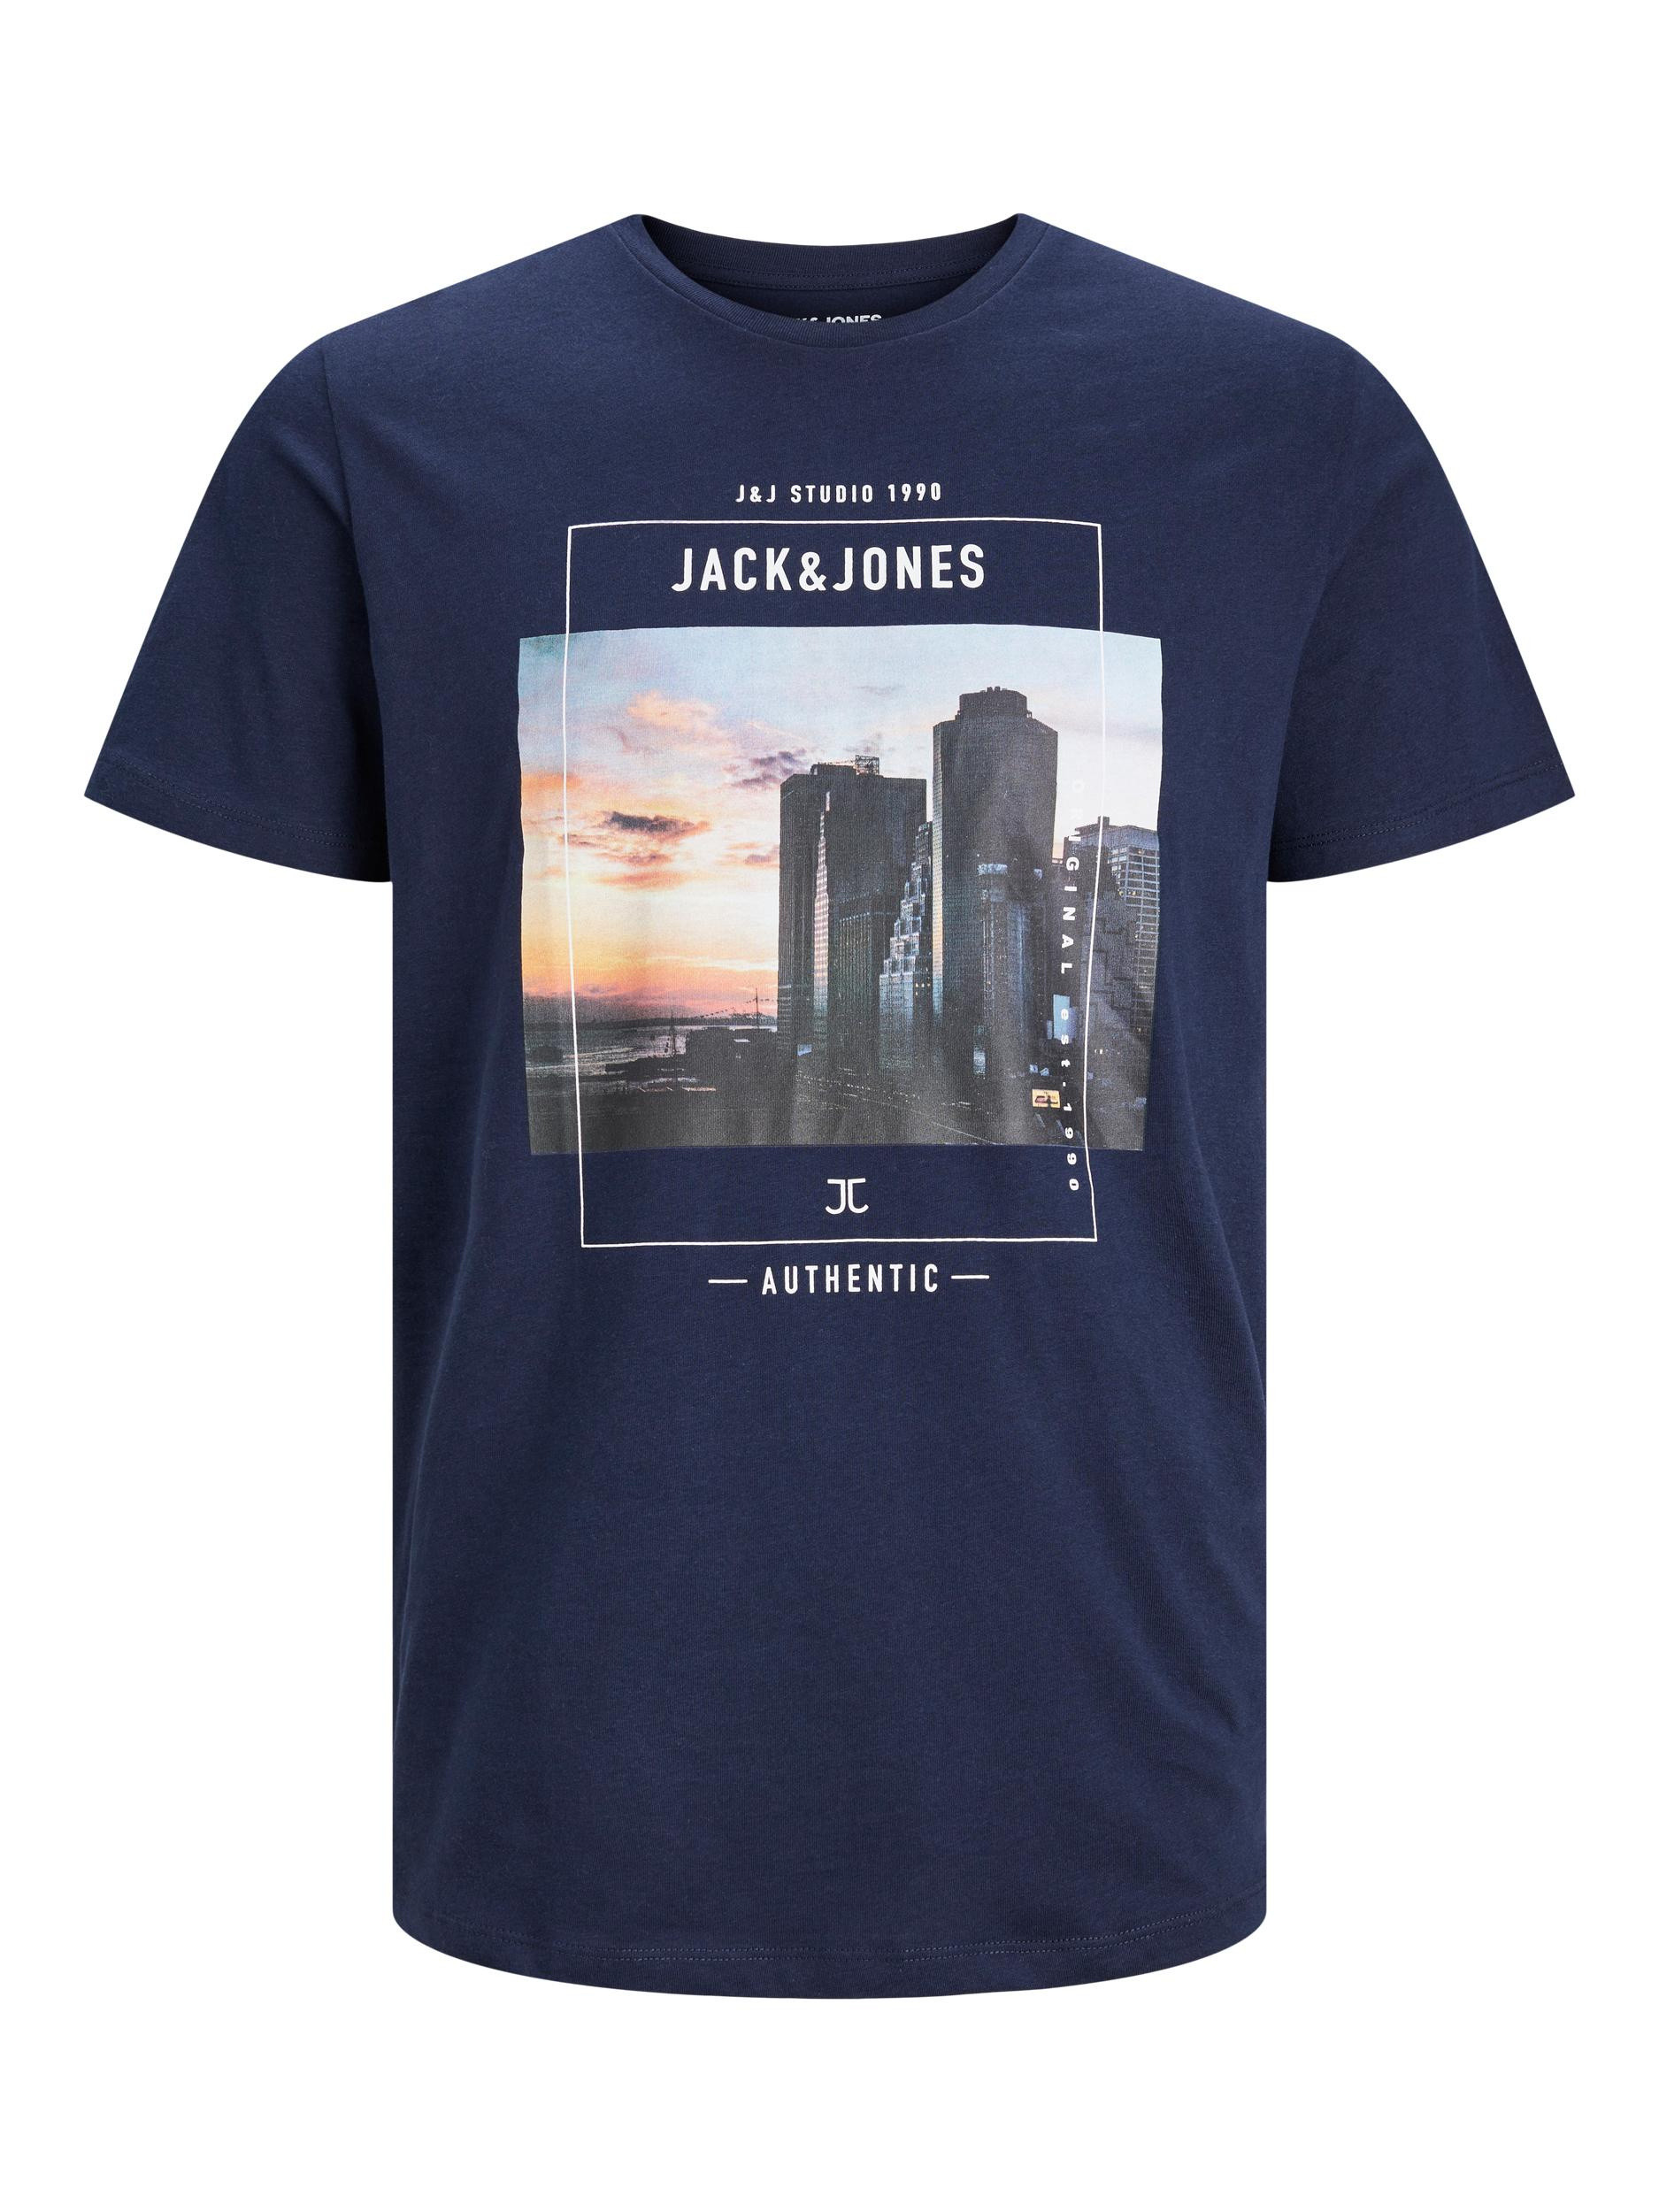 Jack & Jones -T-shirt in cotone con stampa, Blu scuro, large image number 0